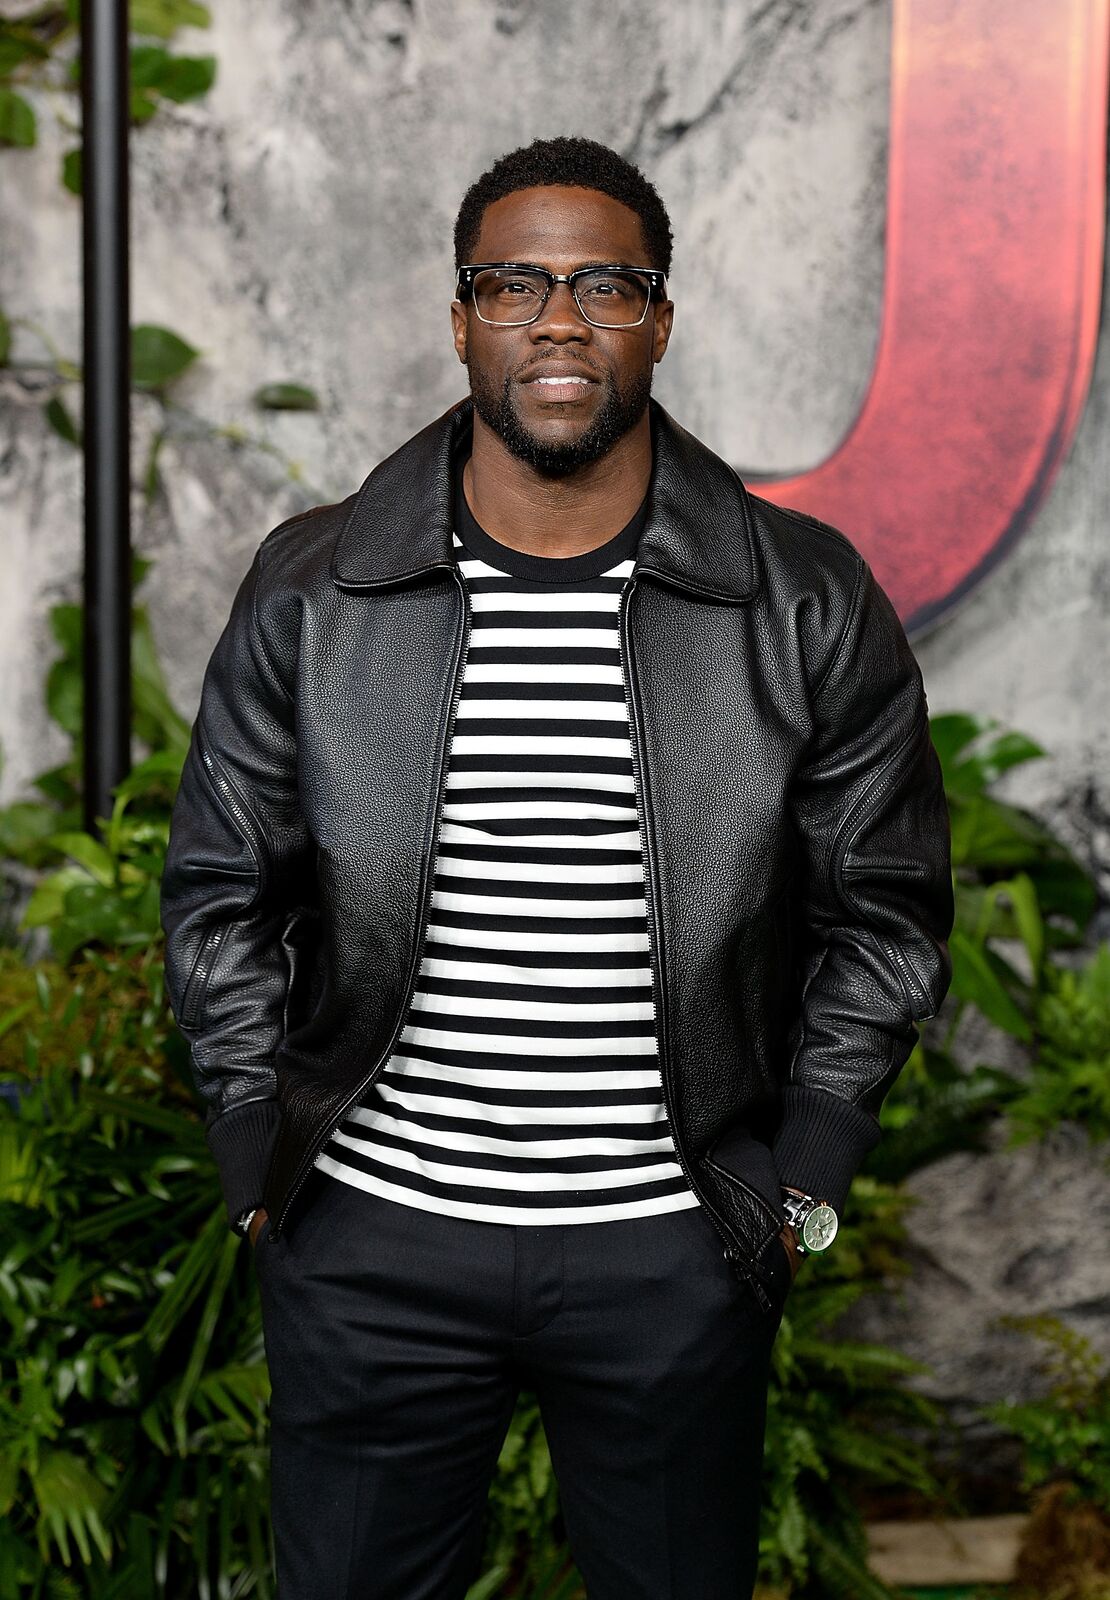  Kevin Hart attends the 'Jumanji: Welcome To The Jungle' UK premiere held at Vue West End on December 7, 2017 | Photo: Getty Images